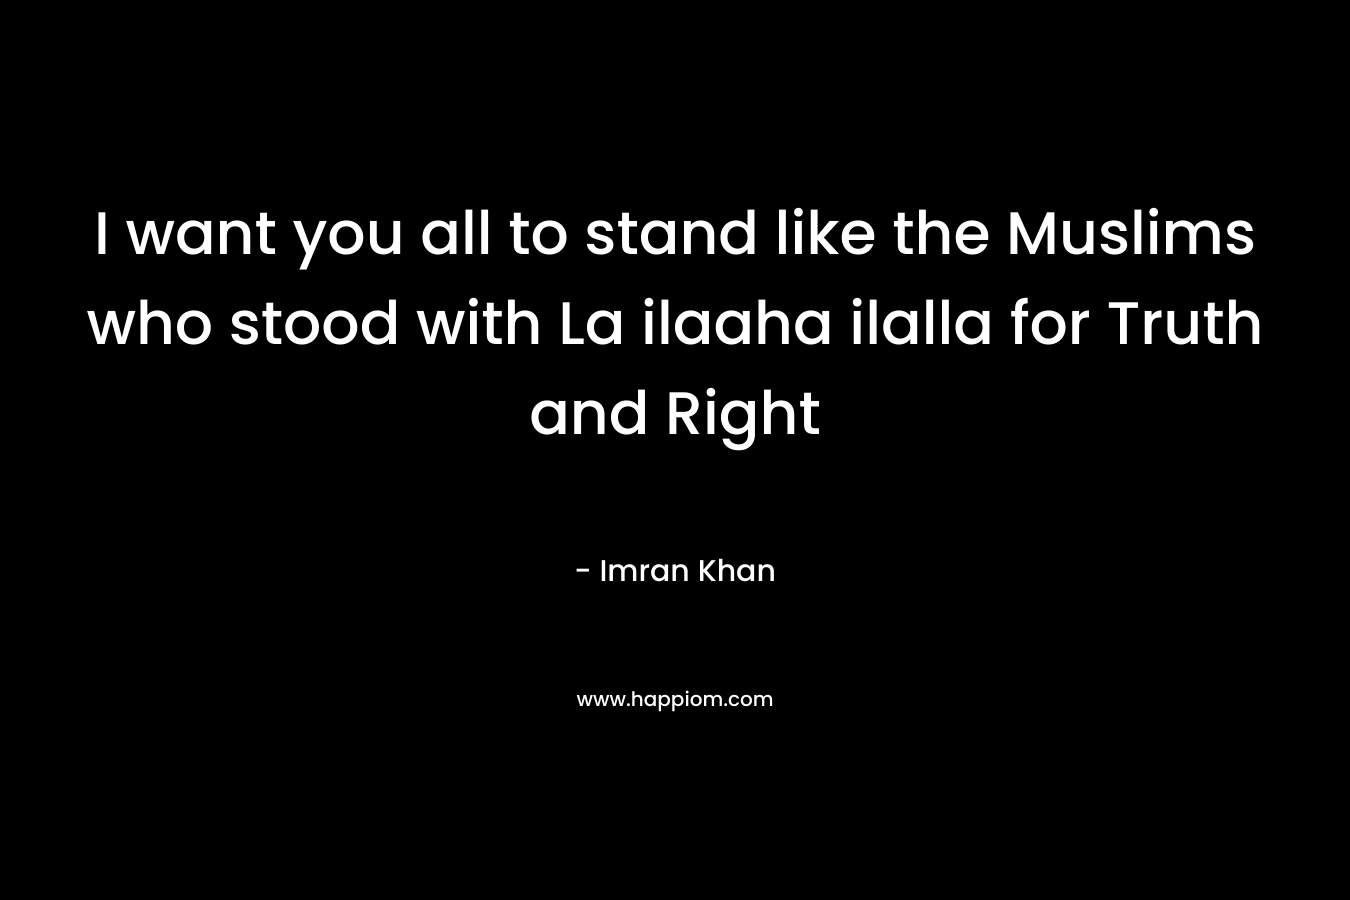 I want you all to stand like the Muslims who stood with La ilaaha ilalla for Truth and Right – Imran Khan